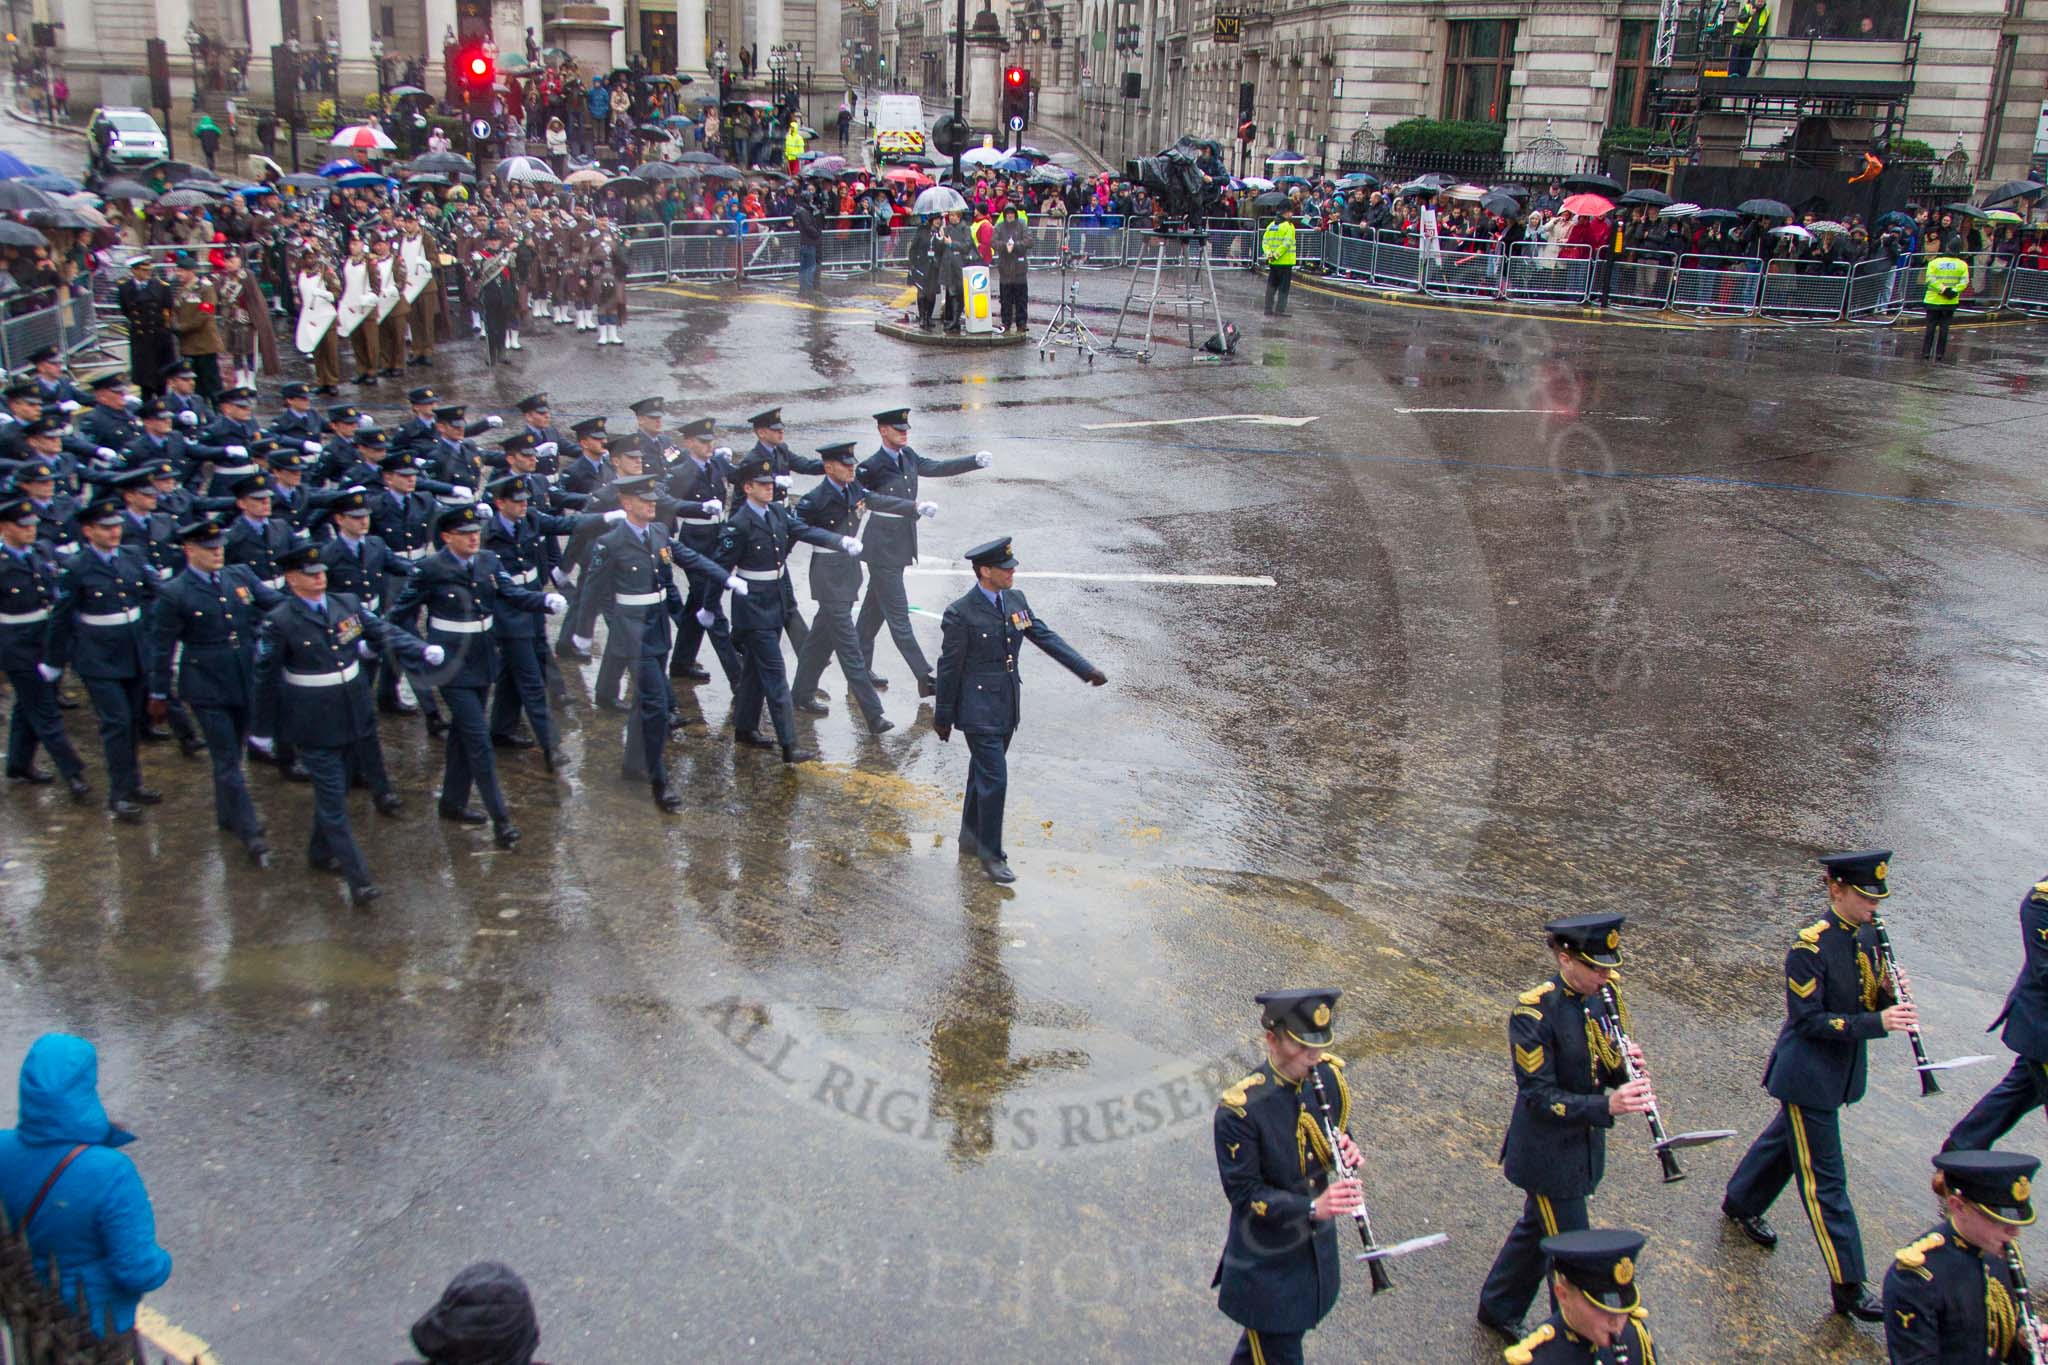 Lord Mayor's Show 2013: 16-Royal Air Force- marching contingent includes Regular and Reserve personnel..
Press stand opposite Mansion House, City of London,
London,
Greater London,
United Kingdom,
on 09 November 2013 at 11:08, image #291